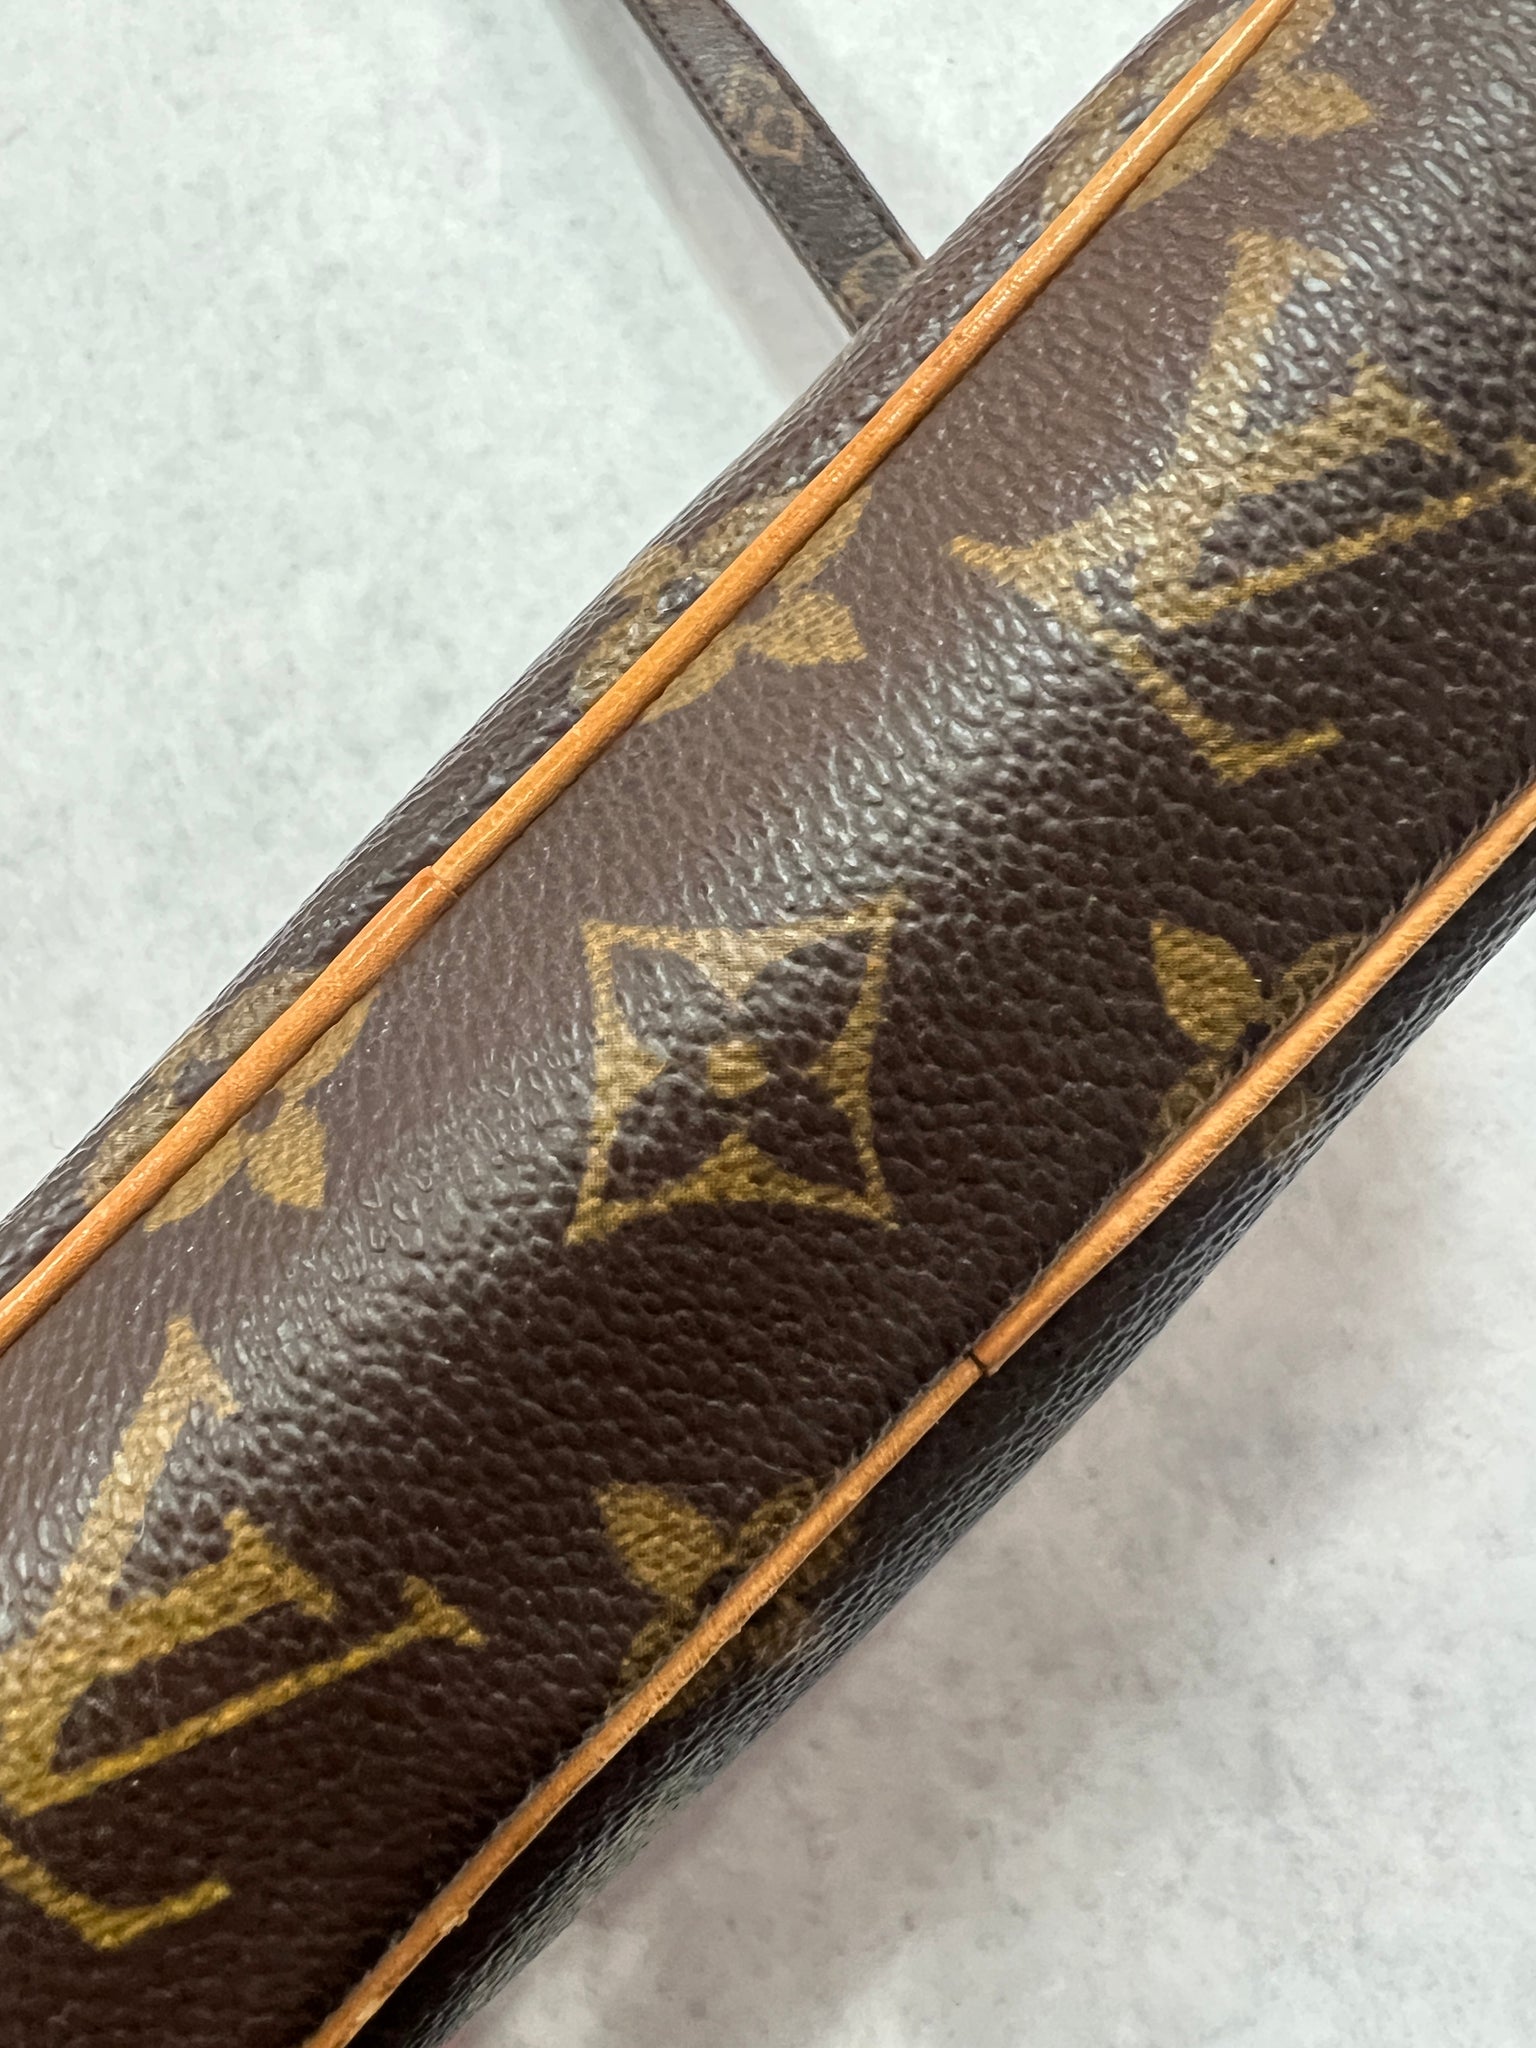 Best Louis Vuitton Vintage Monogram Marly Crossbody for sale in Las Vegas,  Nevada for 2023